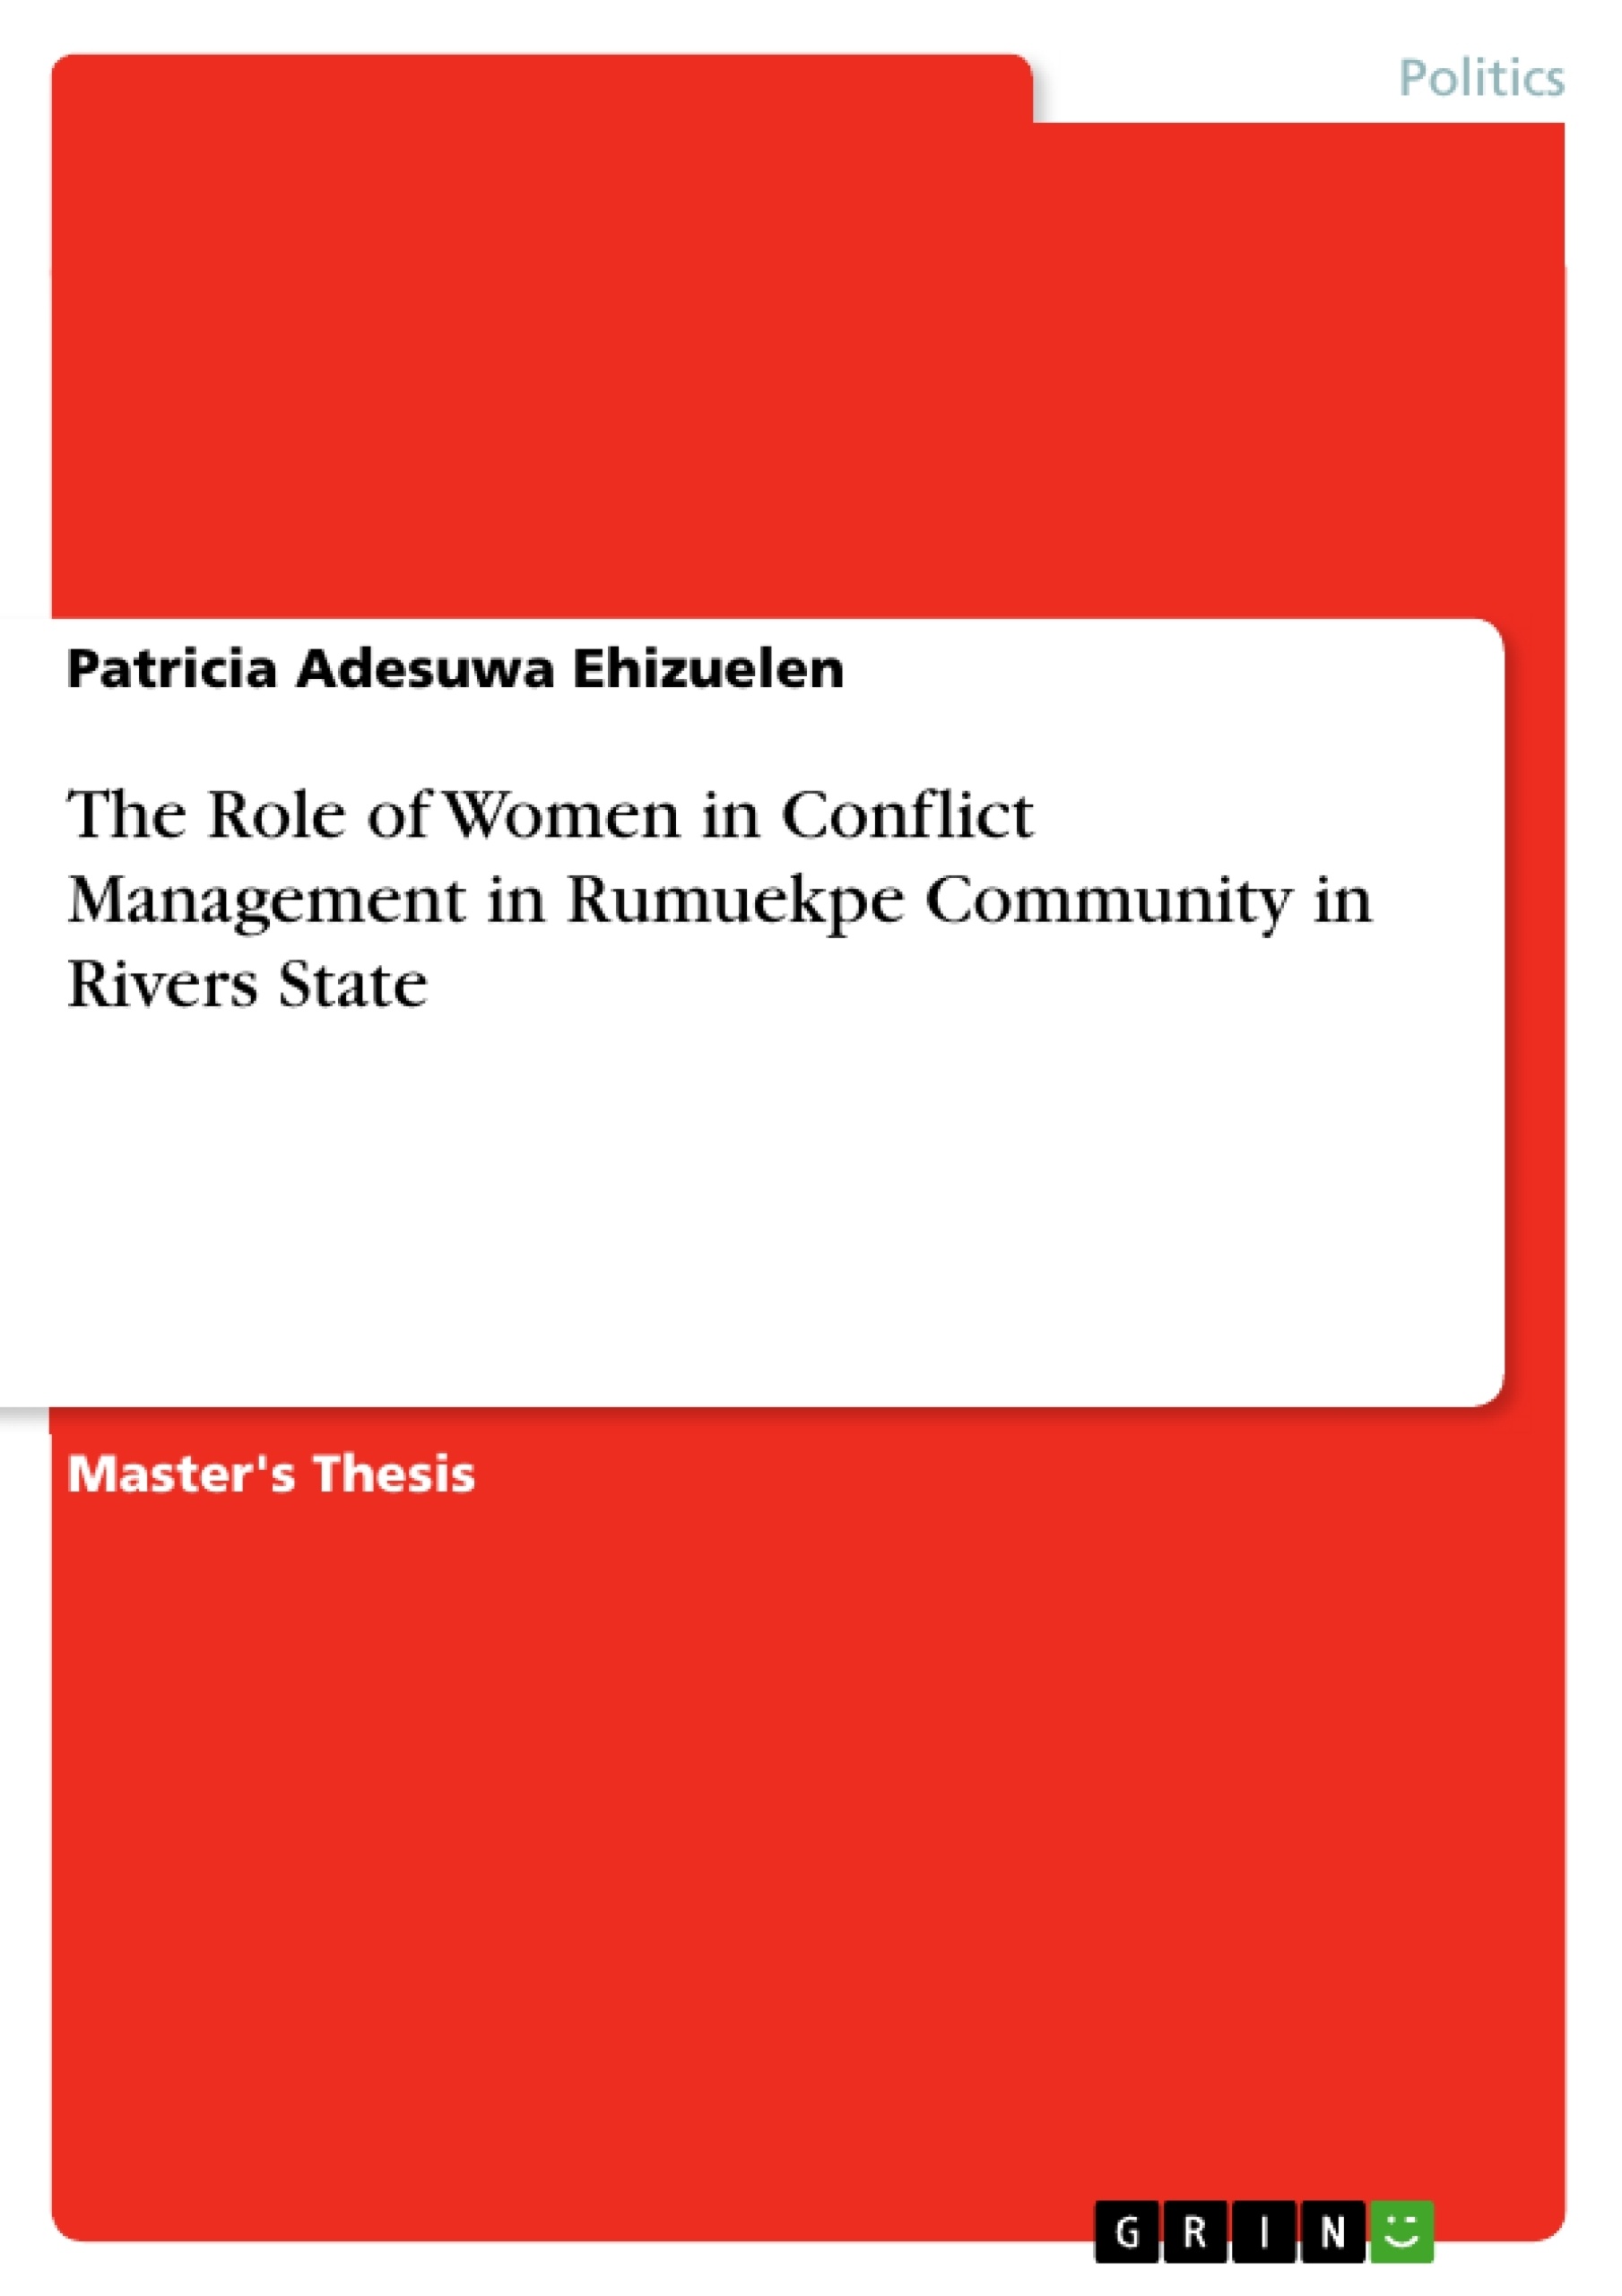 Title: The Role of Women in Conflict Management in Rumuekpe Community in Rivers State